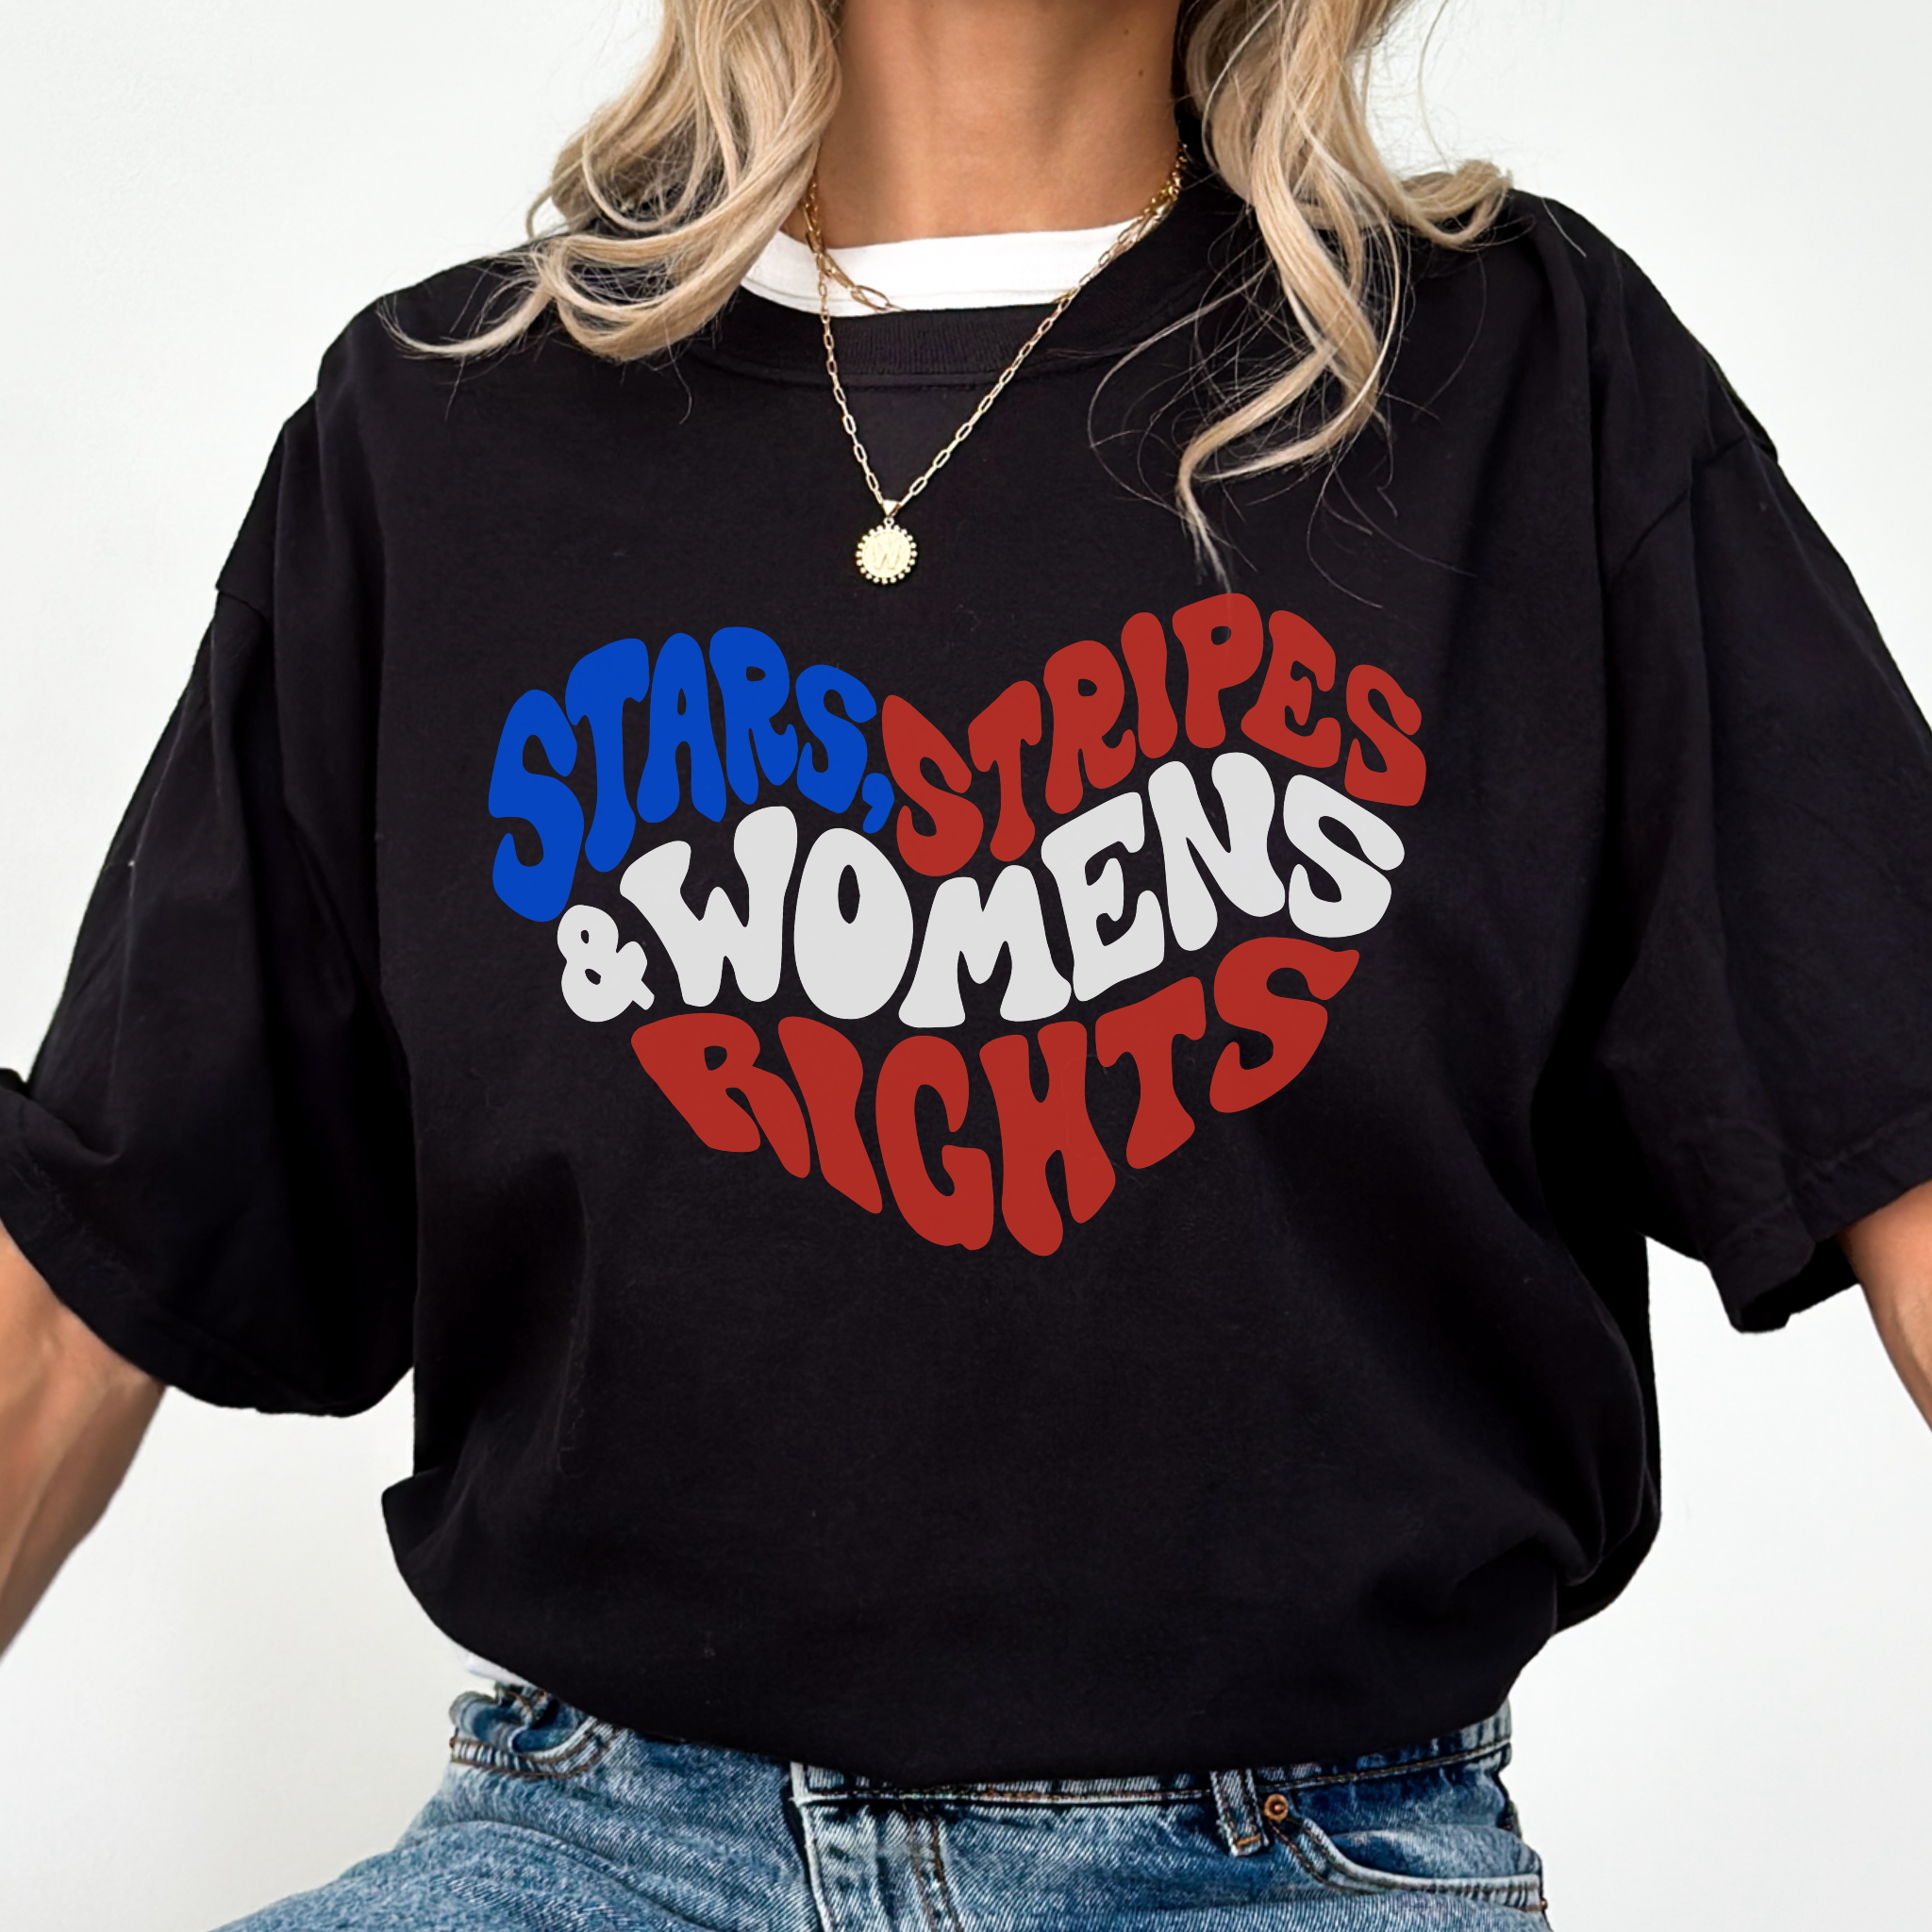 Stars, Stripes, and Women’s Rights Fourth of July Patriotic Comfort Colors Unisex Garment-Dyed T-shirt